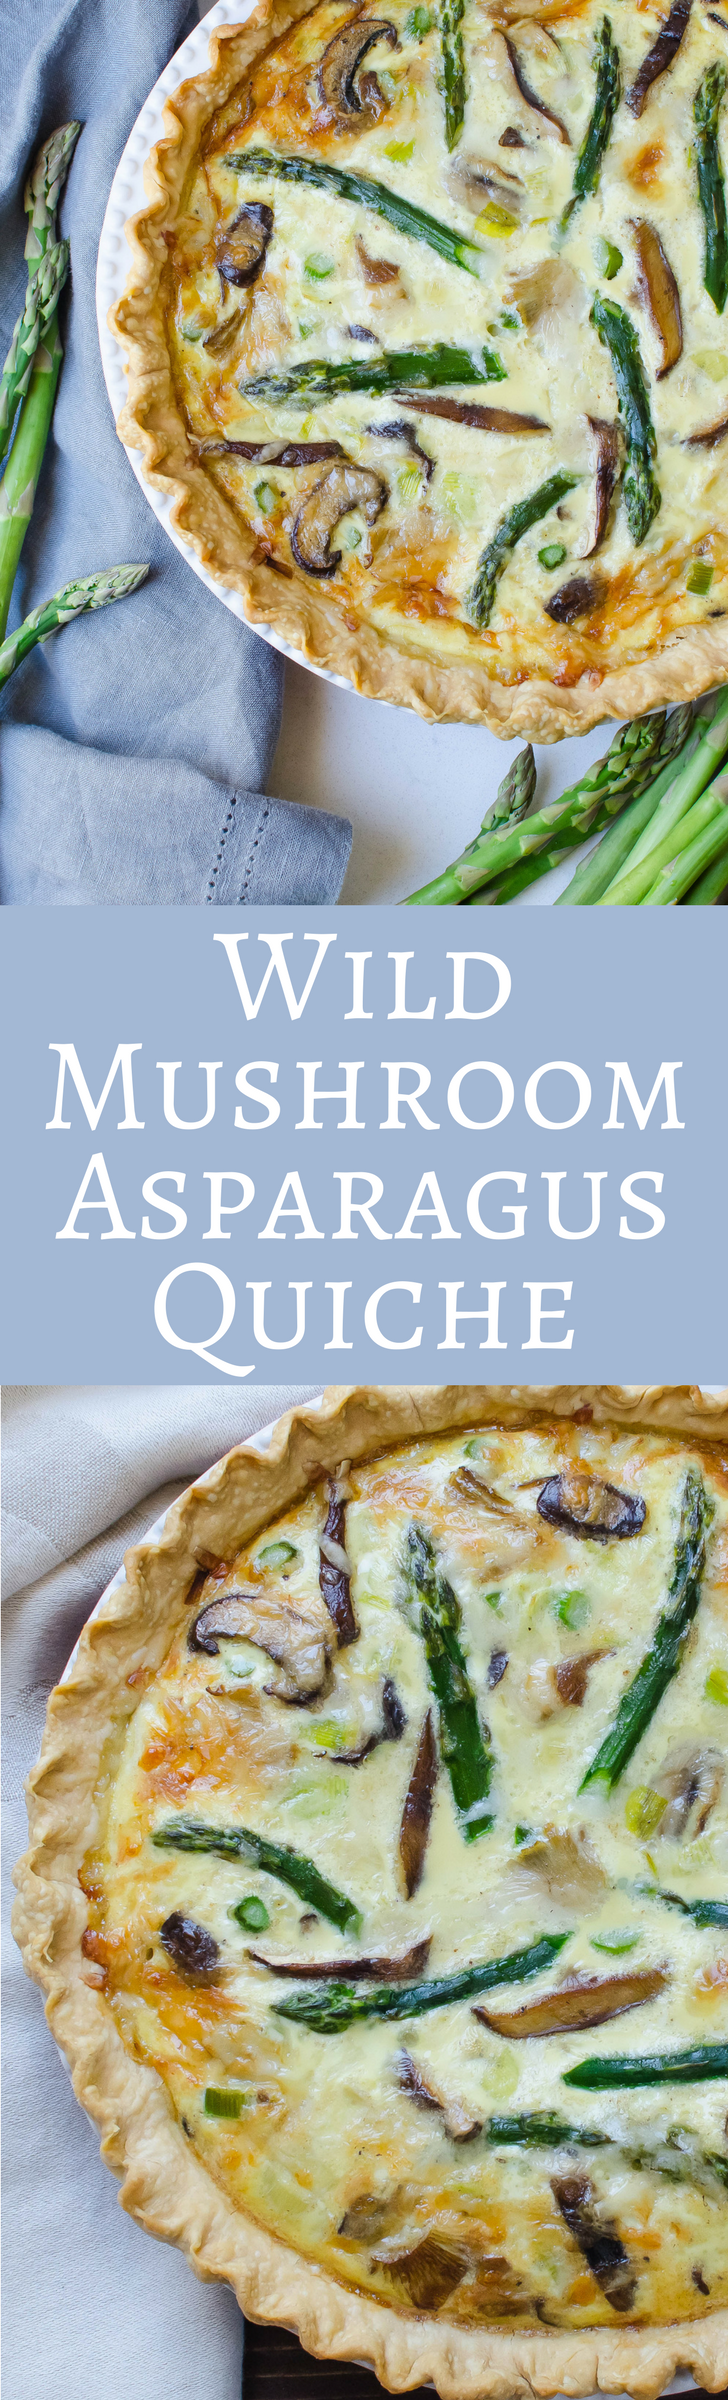 Looking for an easy Spring Quiche recipe? This one has wild mushrooms, asparagus and leeks - it's perfect for brunch entertaining and great for Easter and Mother's Day!